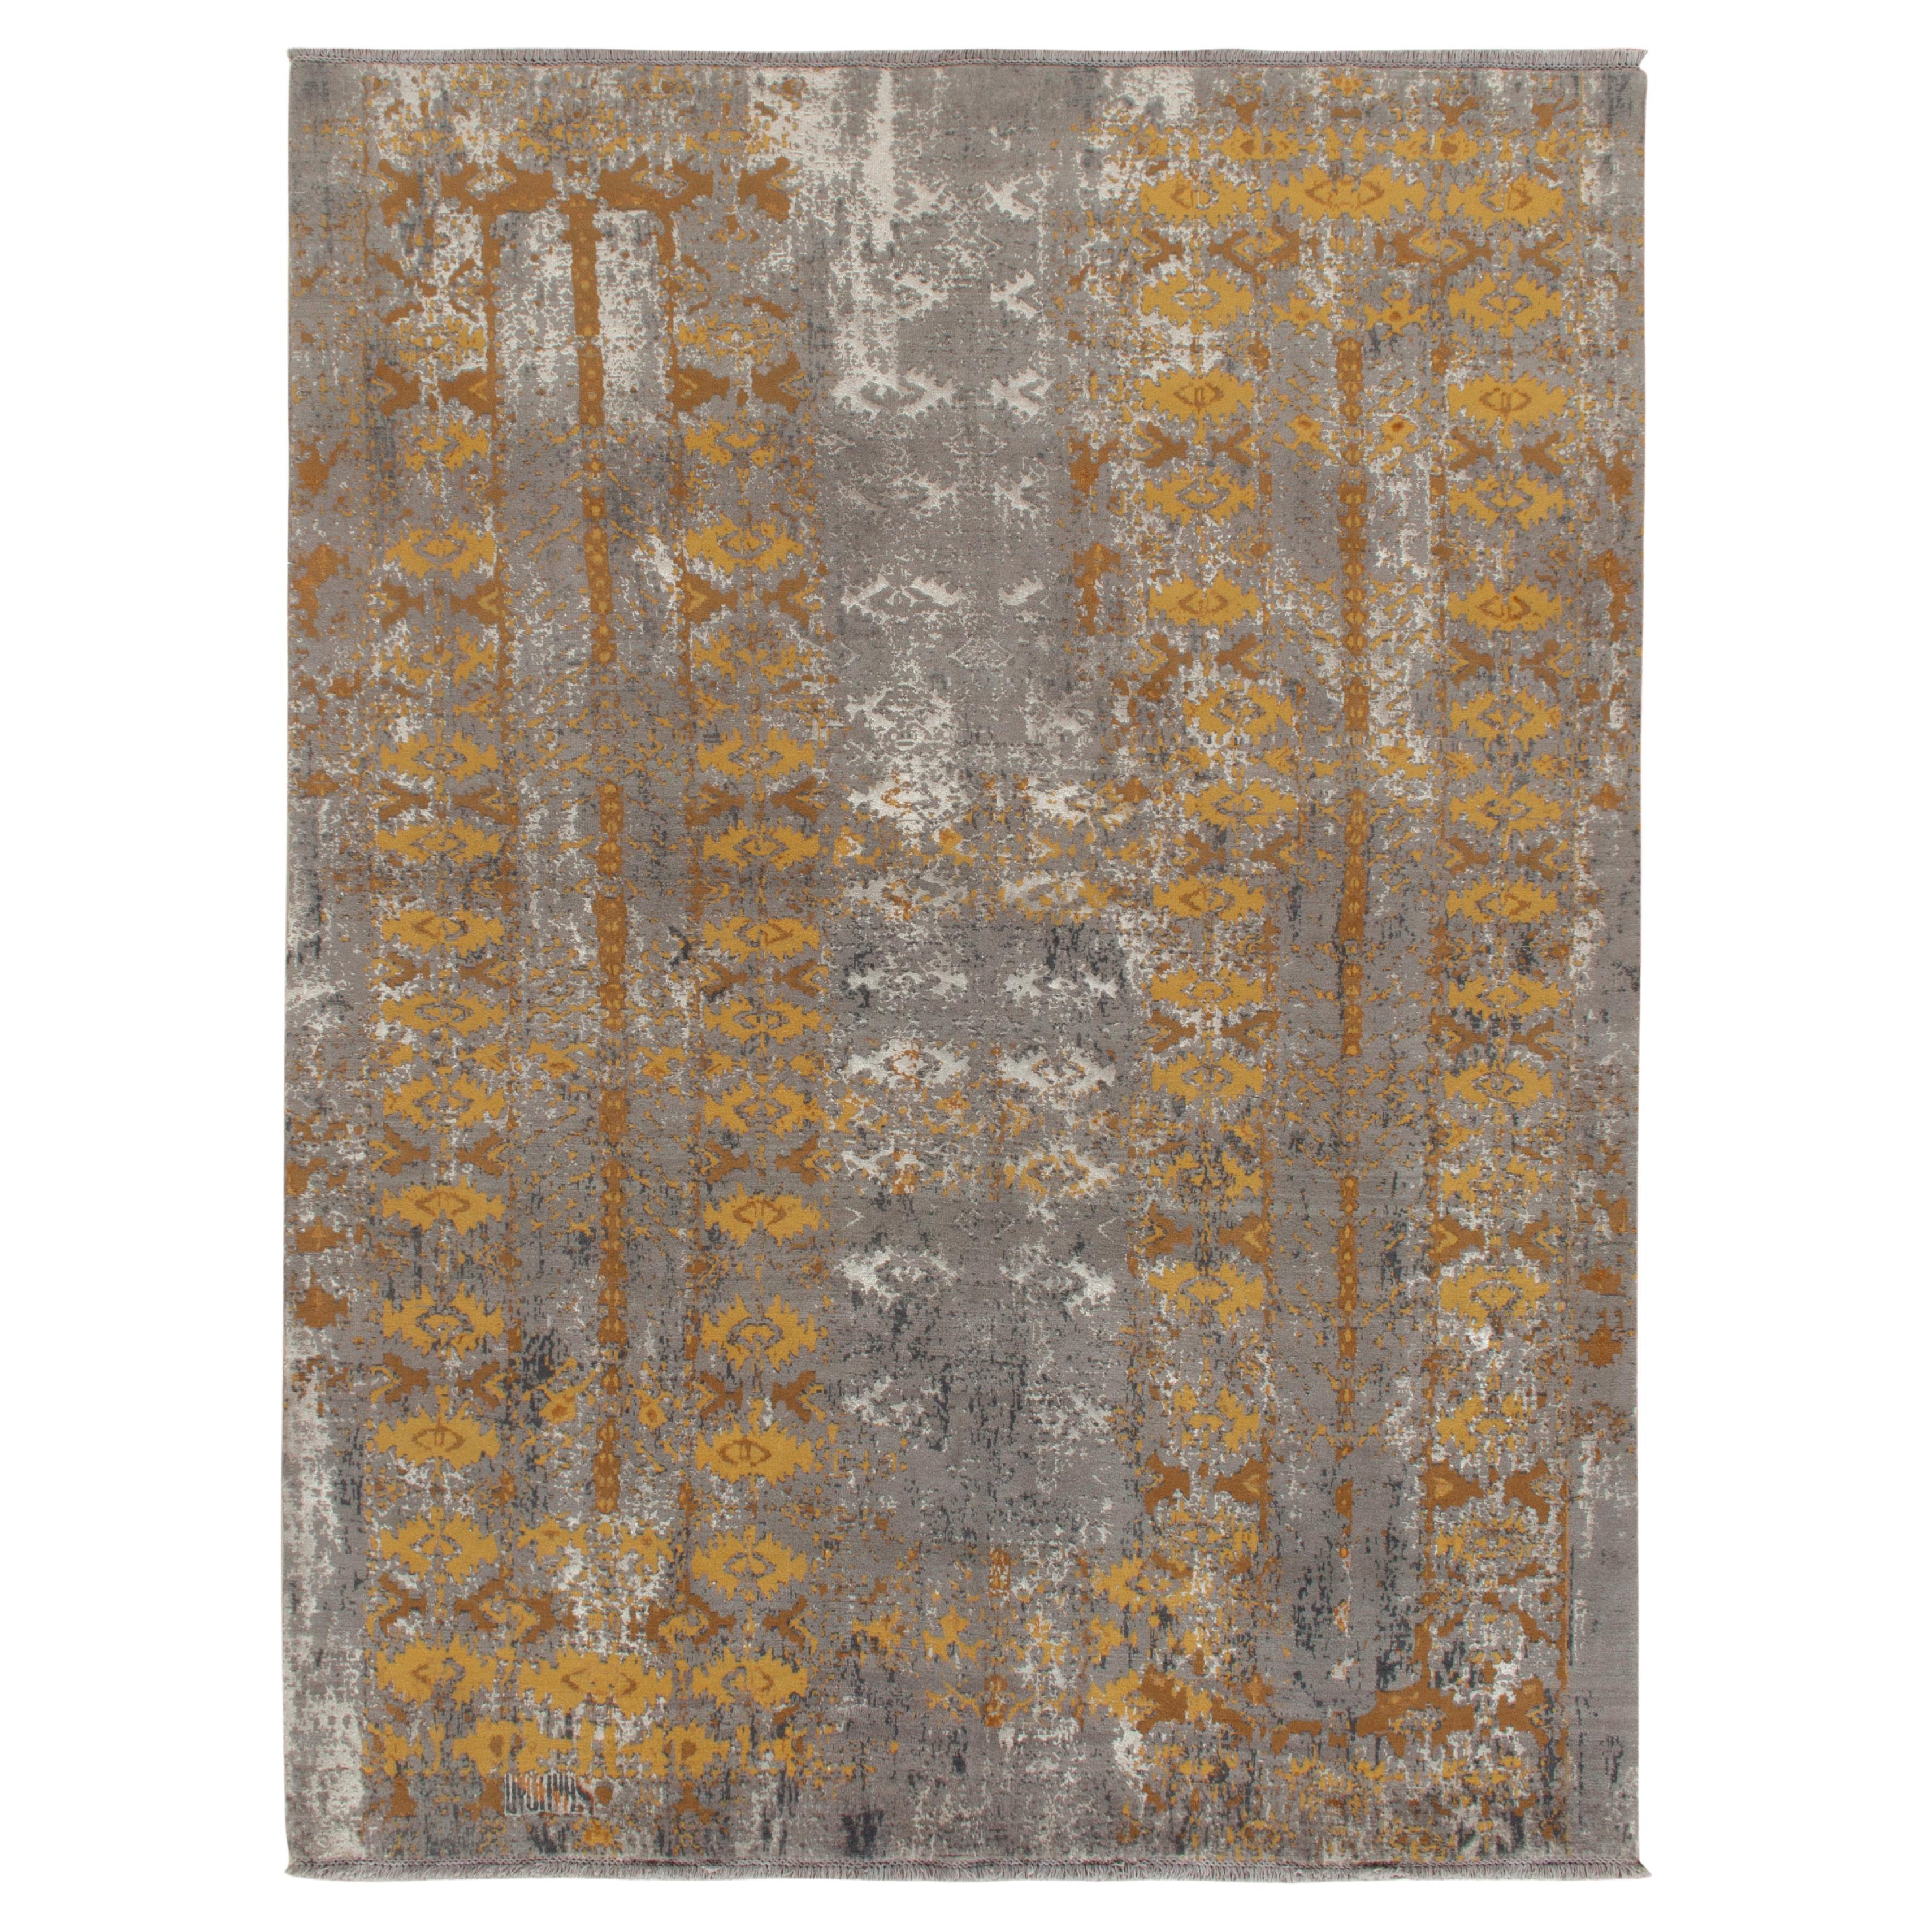 Rug & Kilim’s Abstract Rug in Gray, Gold & Beige-Brown All over Pattern